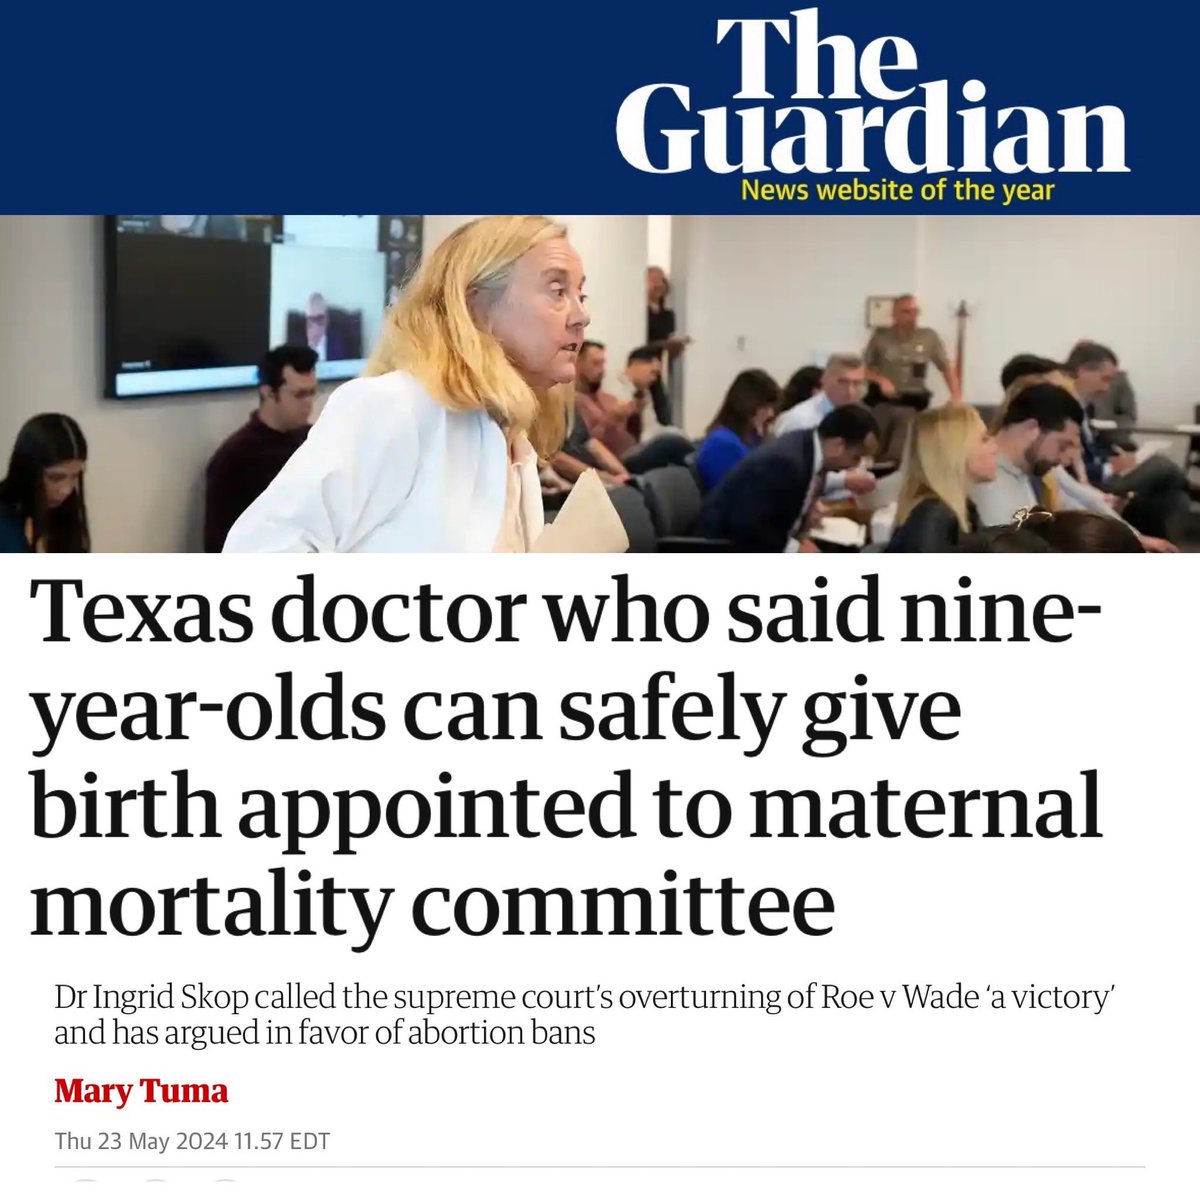 We are truly living at the intersection of the darkest times and the dumbest times. Conspiracy theories and right wing agendas in healthcare are going to continue to get women killed.